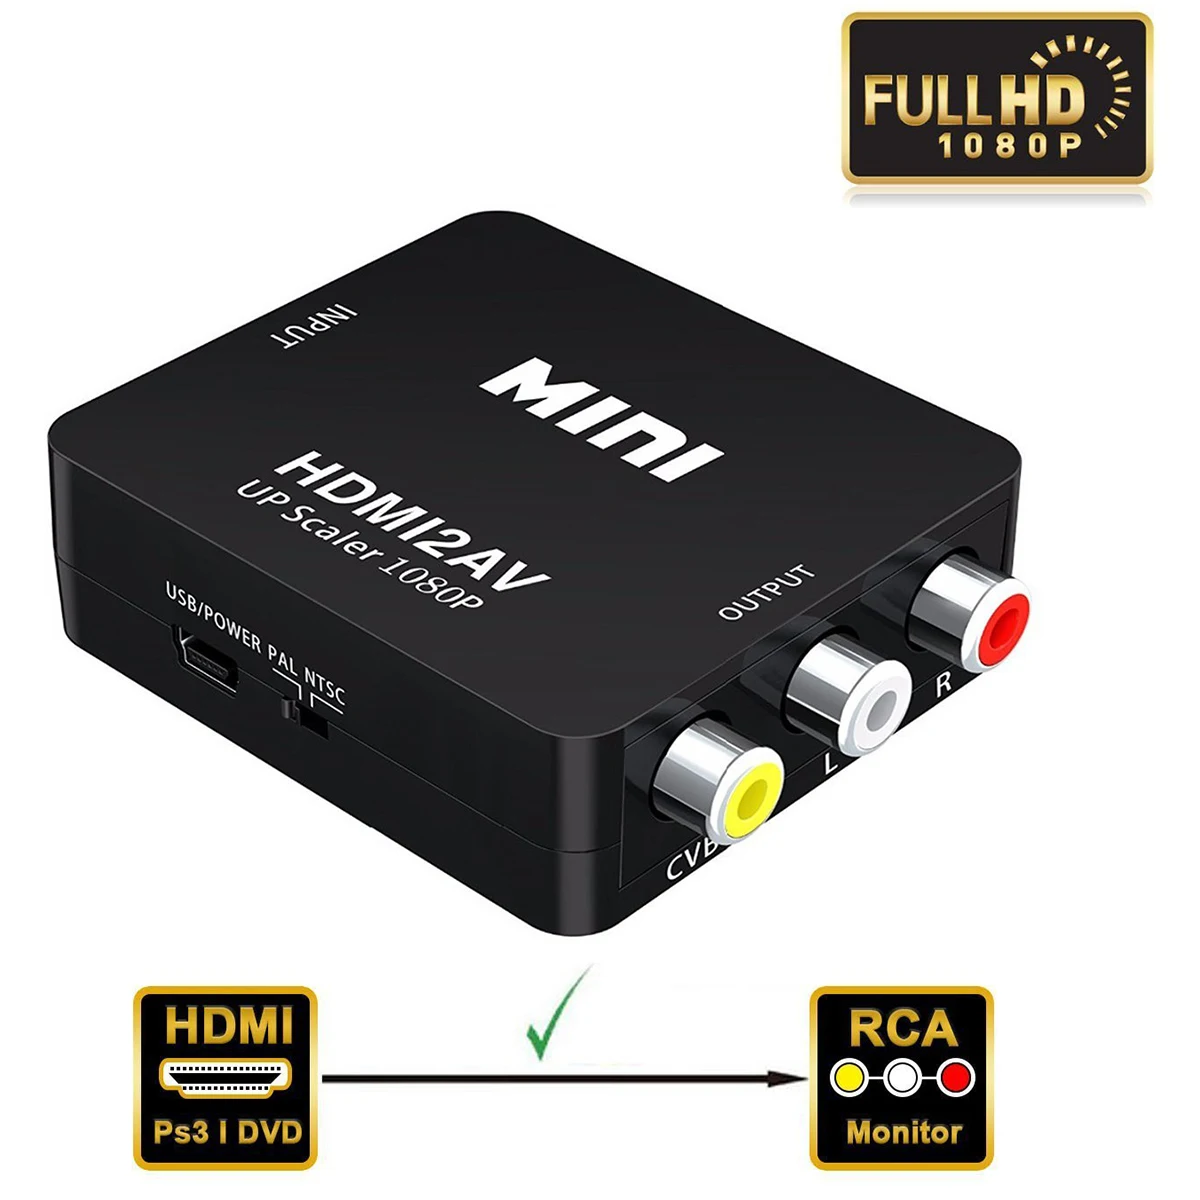 

1080P/720P Video Audio Converter HDMI-ompatible to AV/RCA Composite CVBS Adapter for PC Laptop HDTV STB VHS VCR Comb Camera